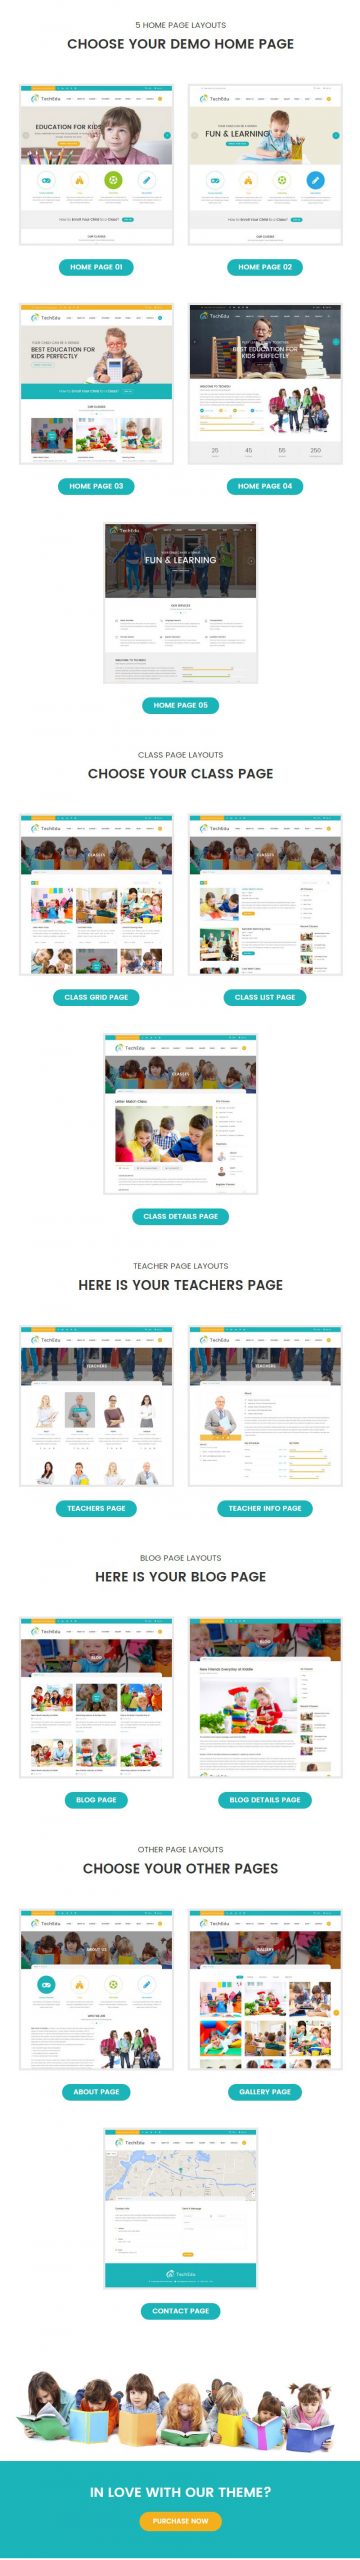 Techedu - Education Bootstrap Template - 1